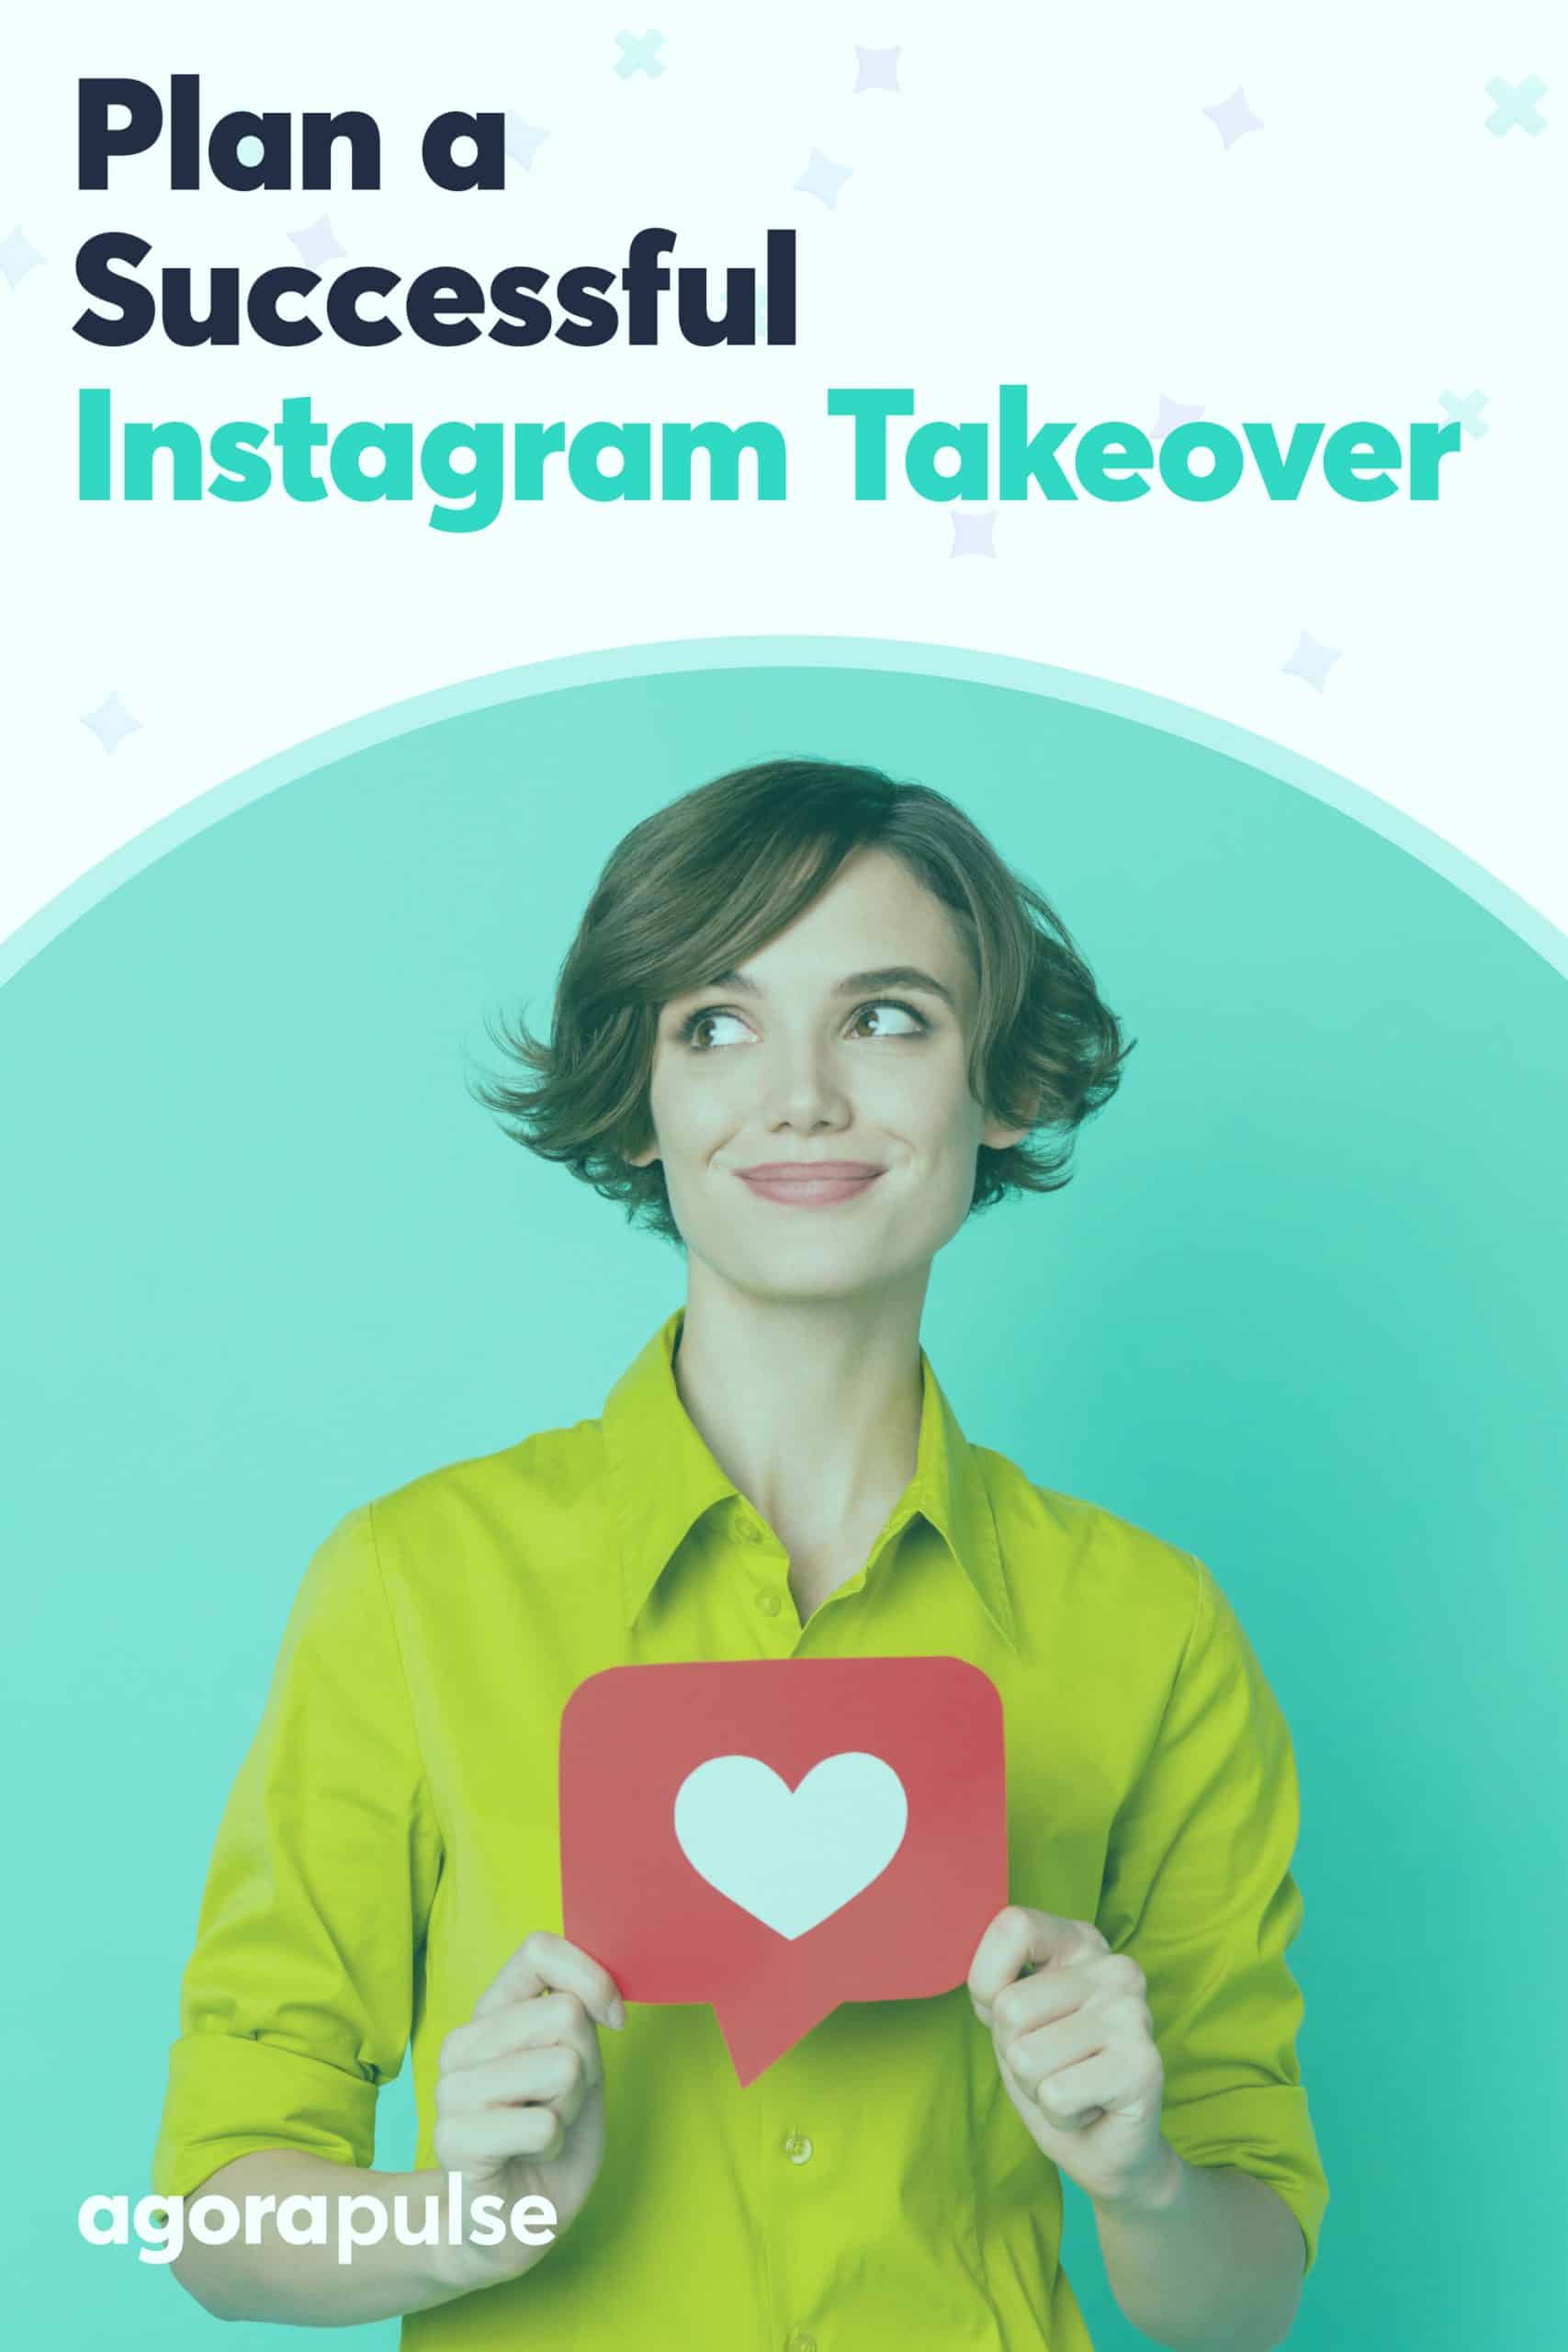 How to Have a Successful Instagram Takeover in 7 Easy Steps